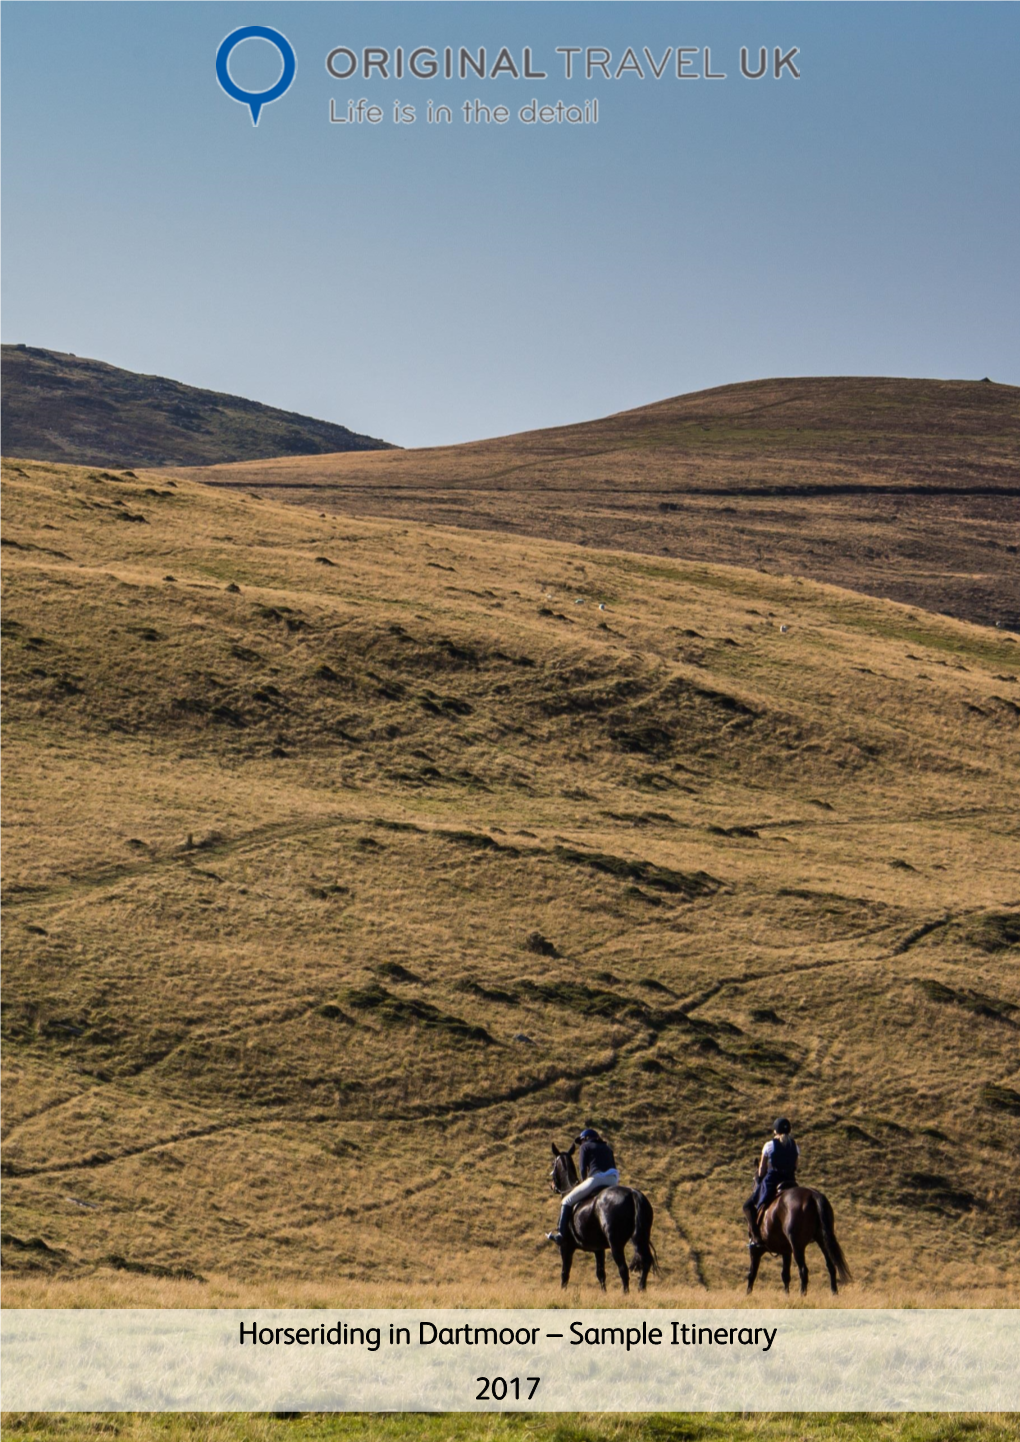 Horseriding in Dartmoor – Sample Itinerary 2017 Introduction